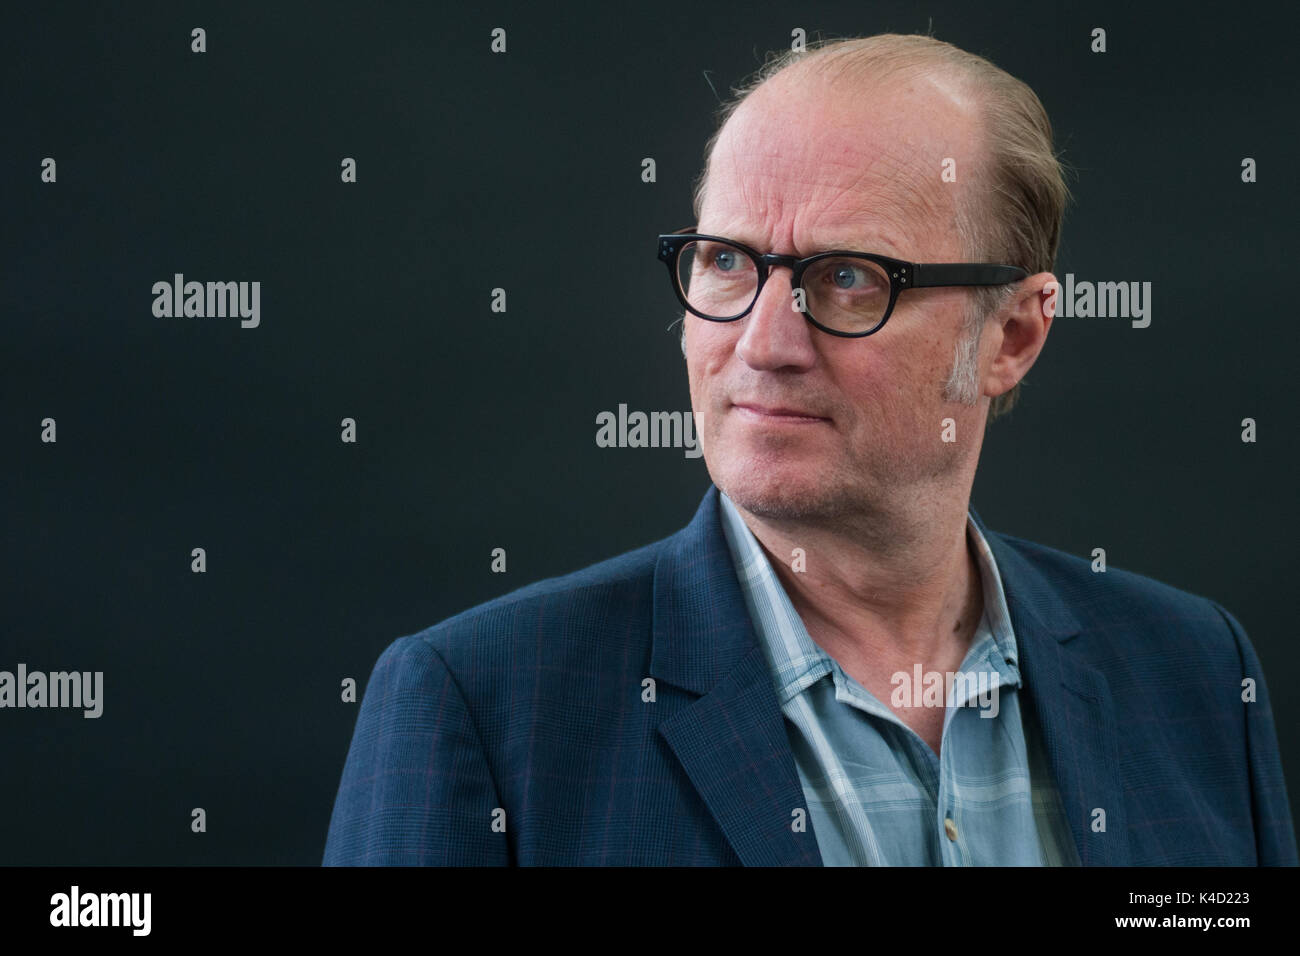 English comedian, actor, writer, musician, television presenter and director Adrian Edmondson attends a photocall during the Edinburgh International B Stock Photo